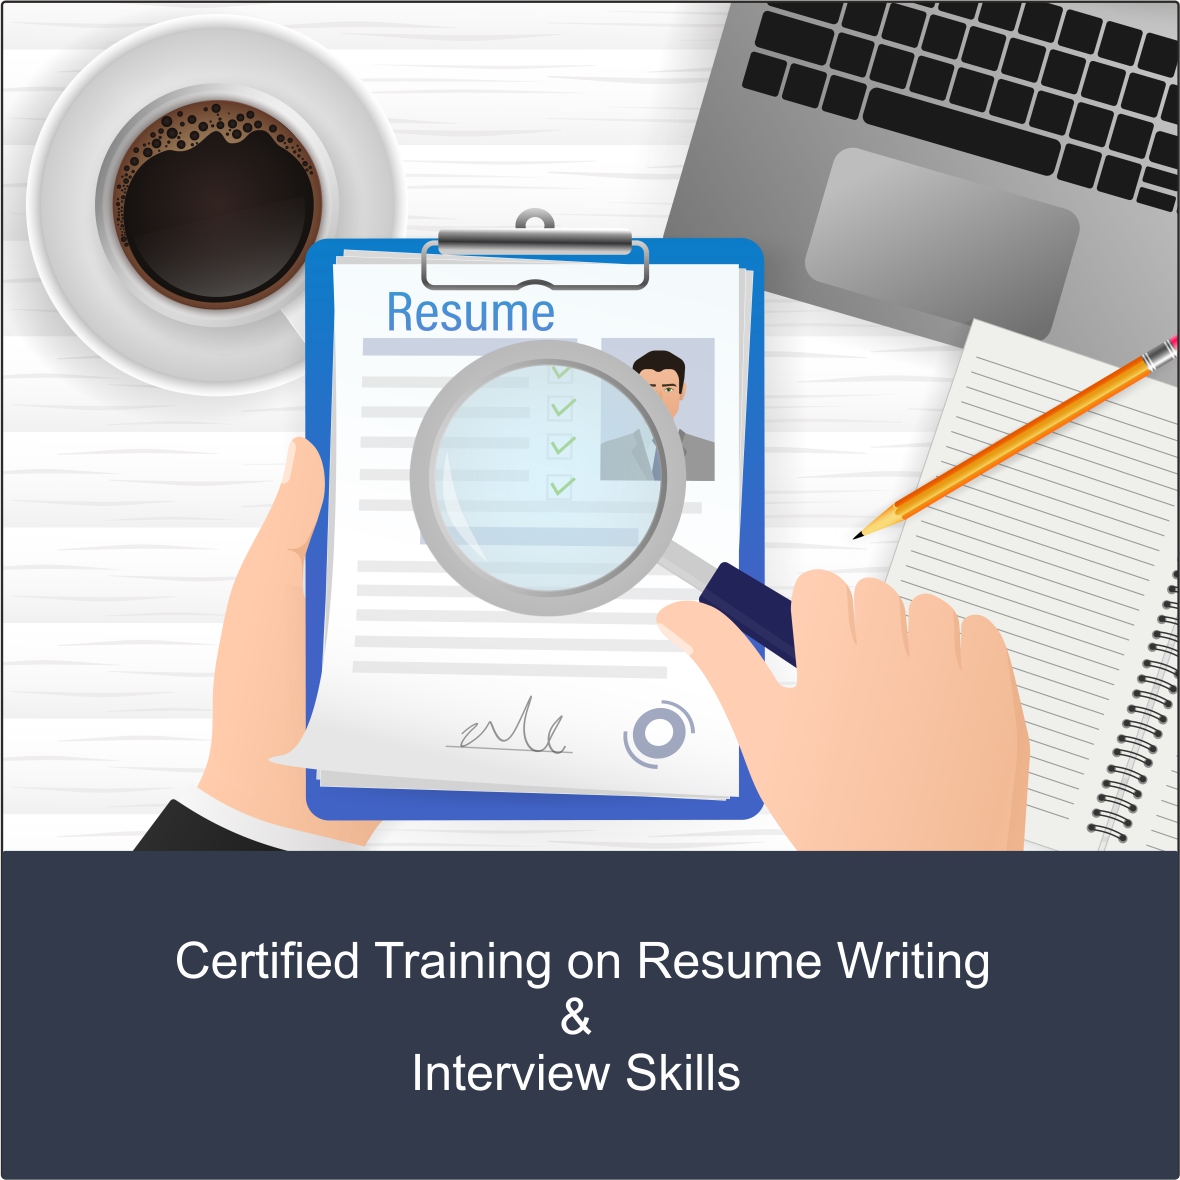 	Certified Training on Resume Writing & Interview Skills